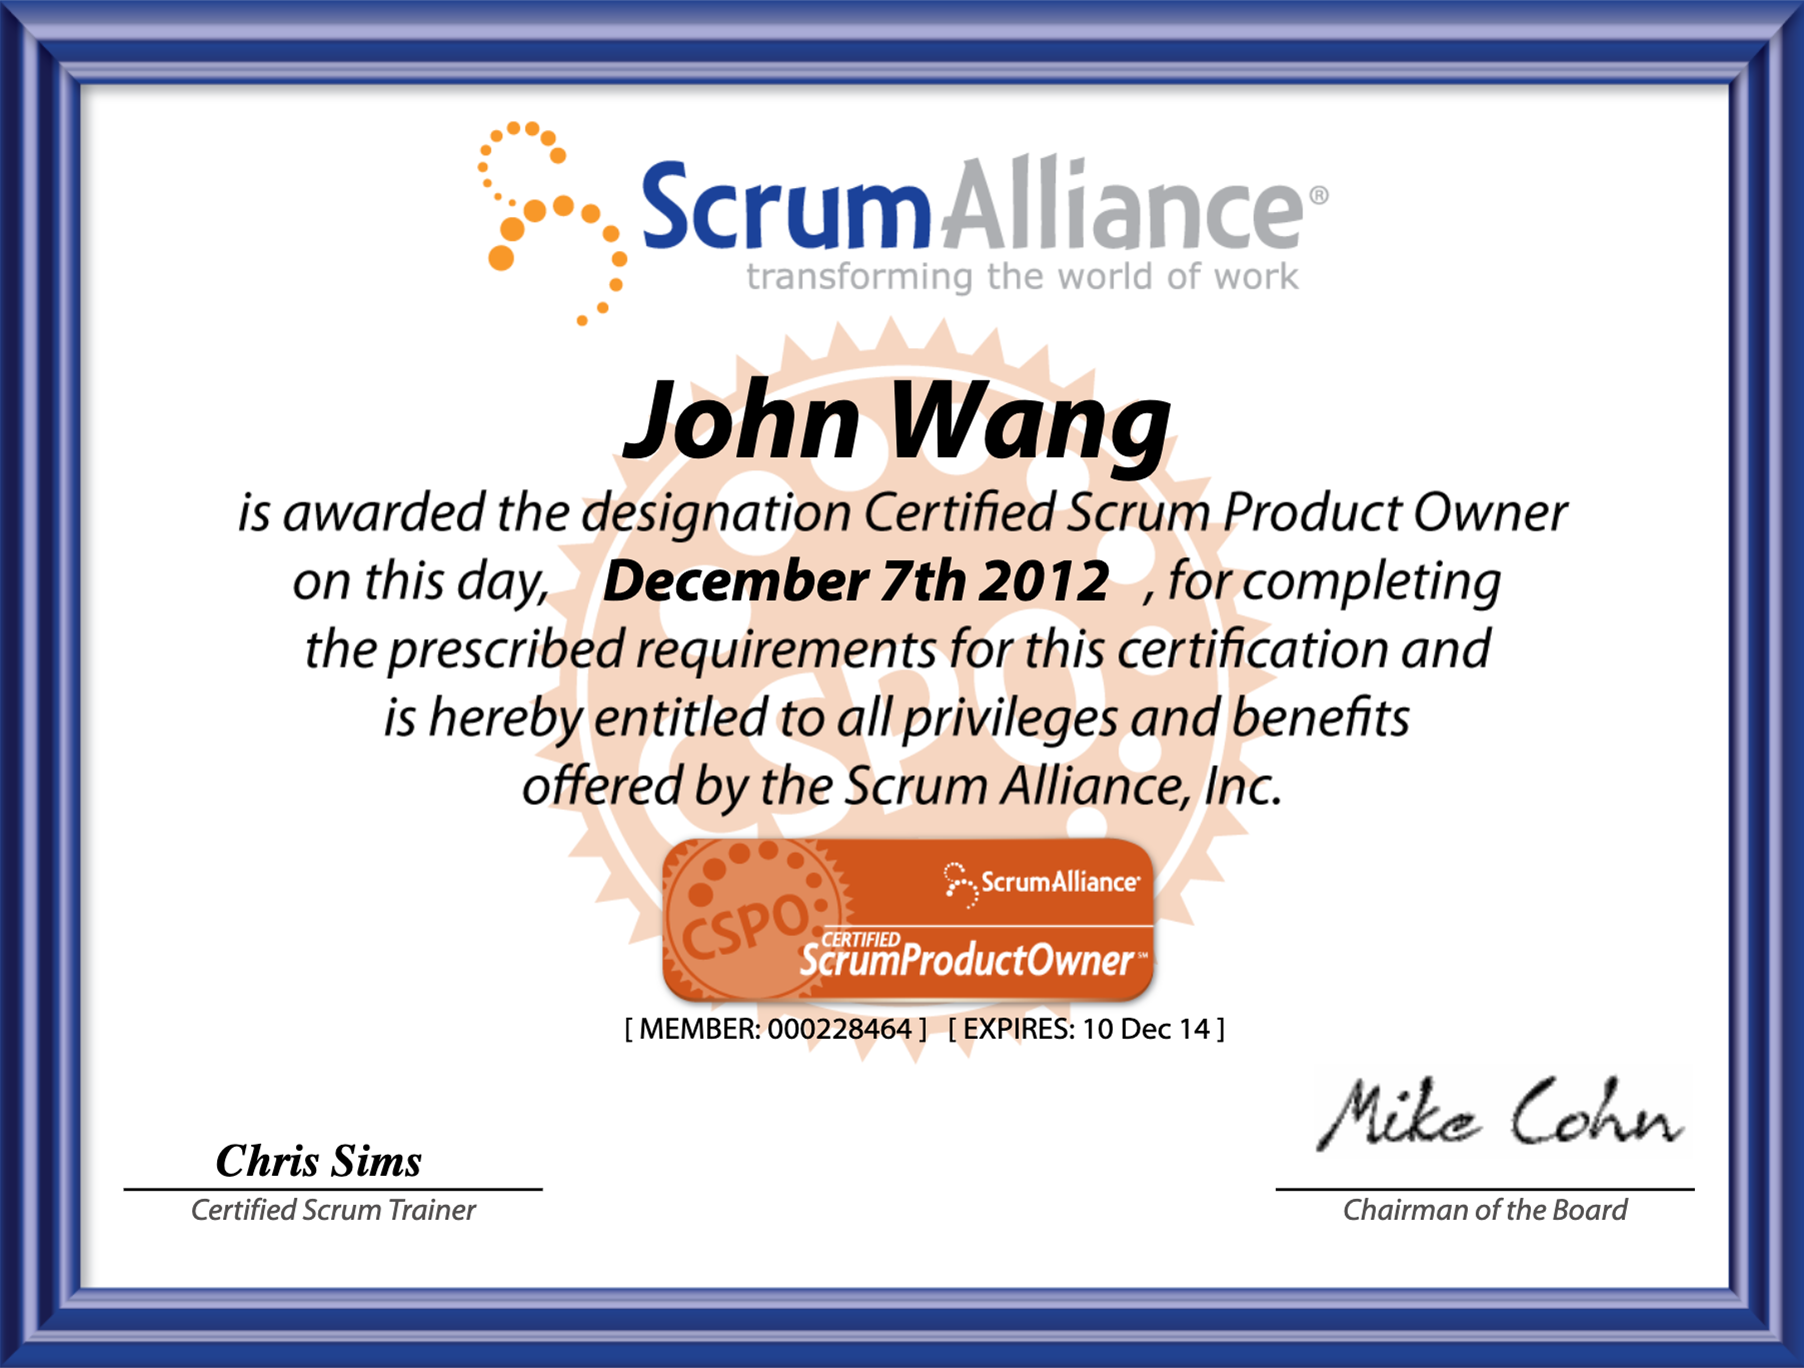 John's Certified Scrum Product Owner (CSPO) from Scrum Alliance